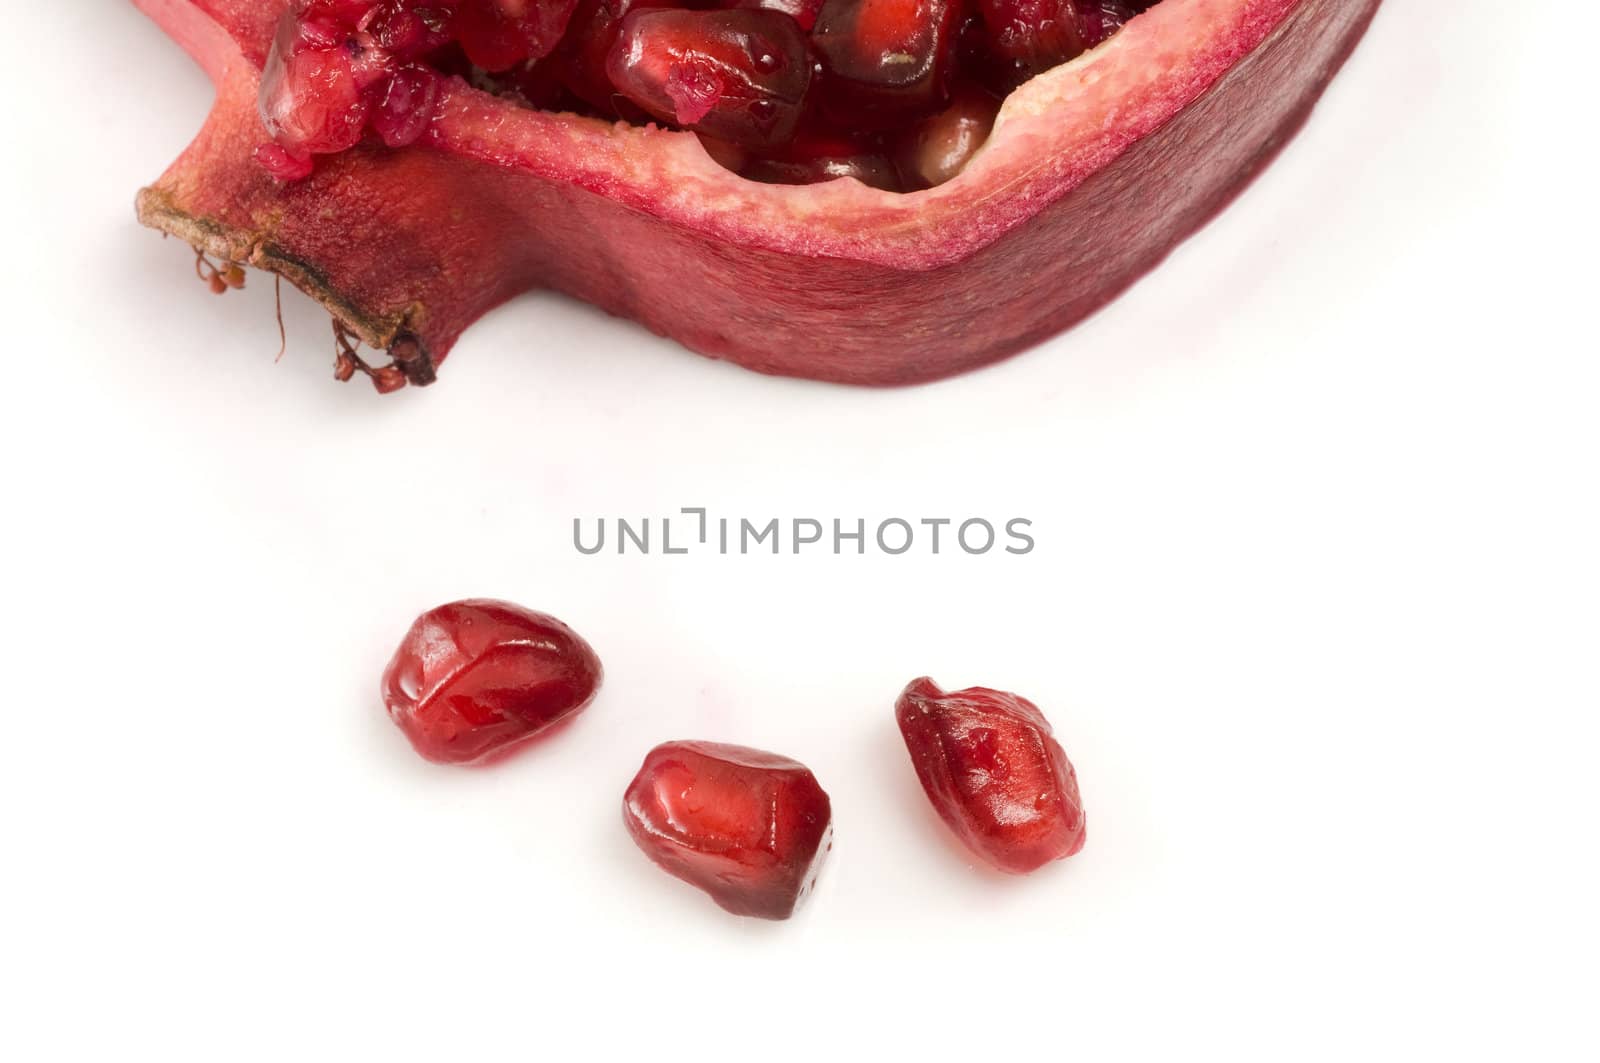 Selective focus on single berries on a white background